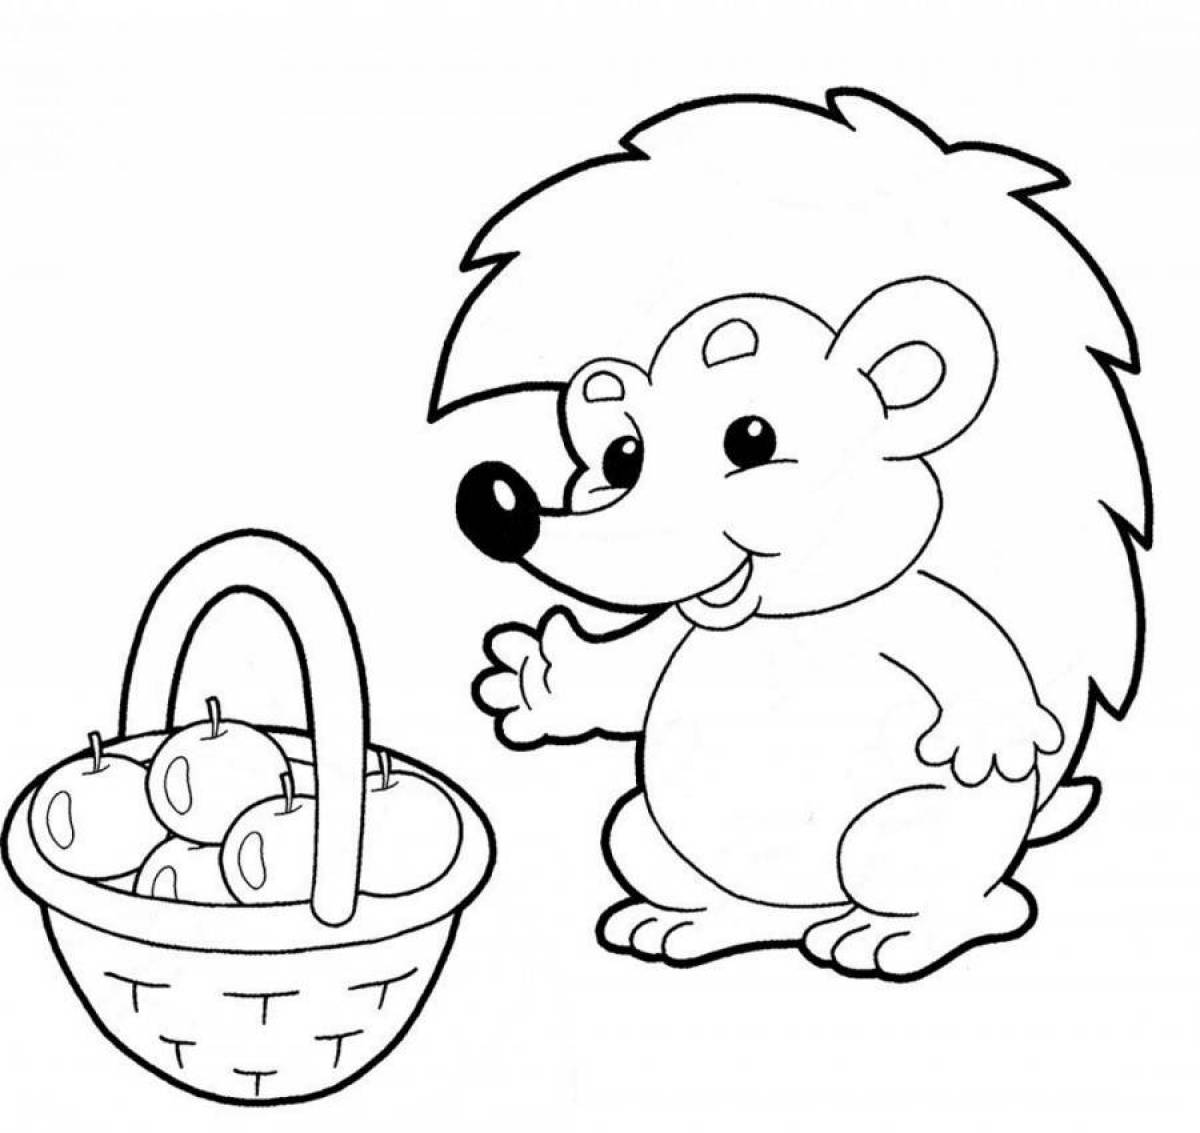 Gorgeous hedgehog coloring book for kids